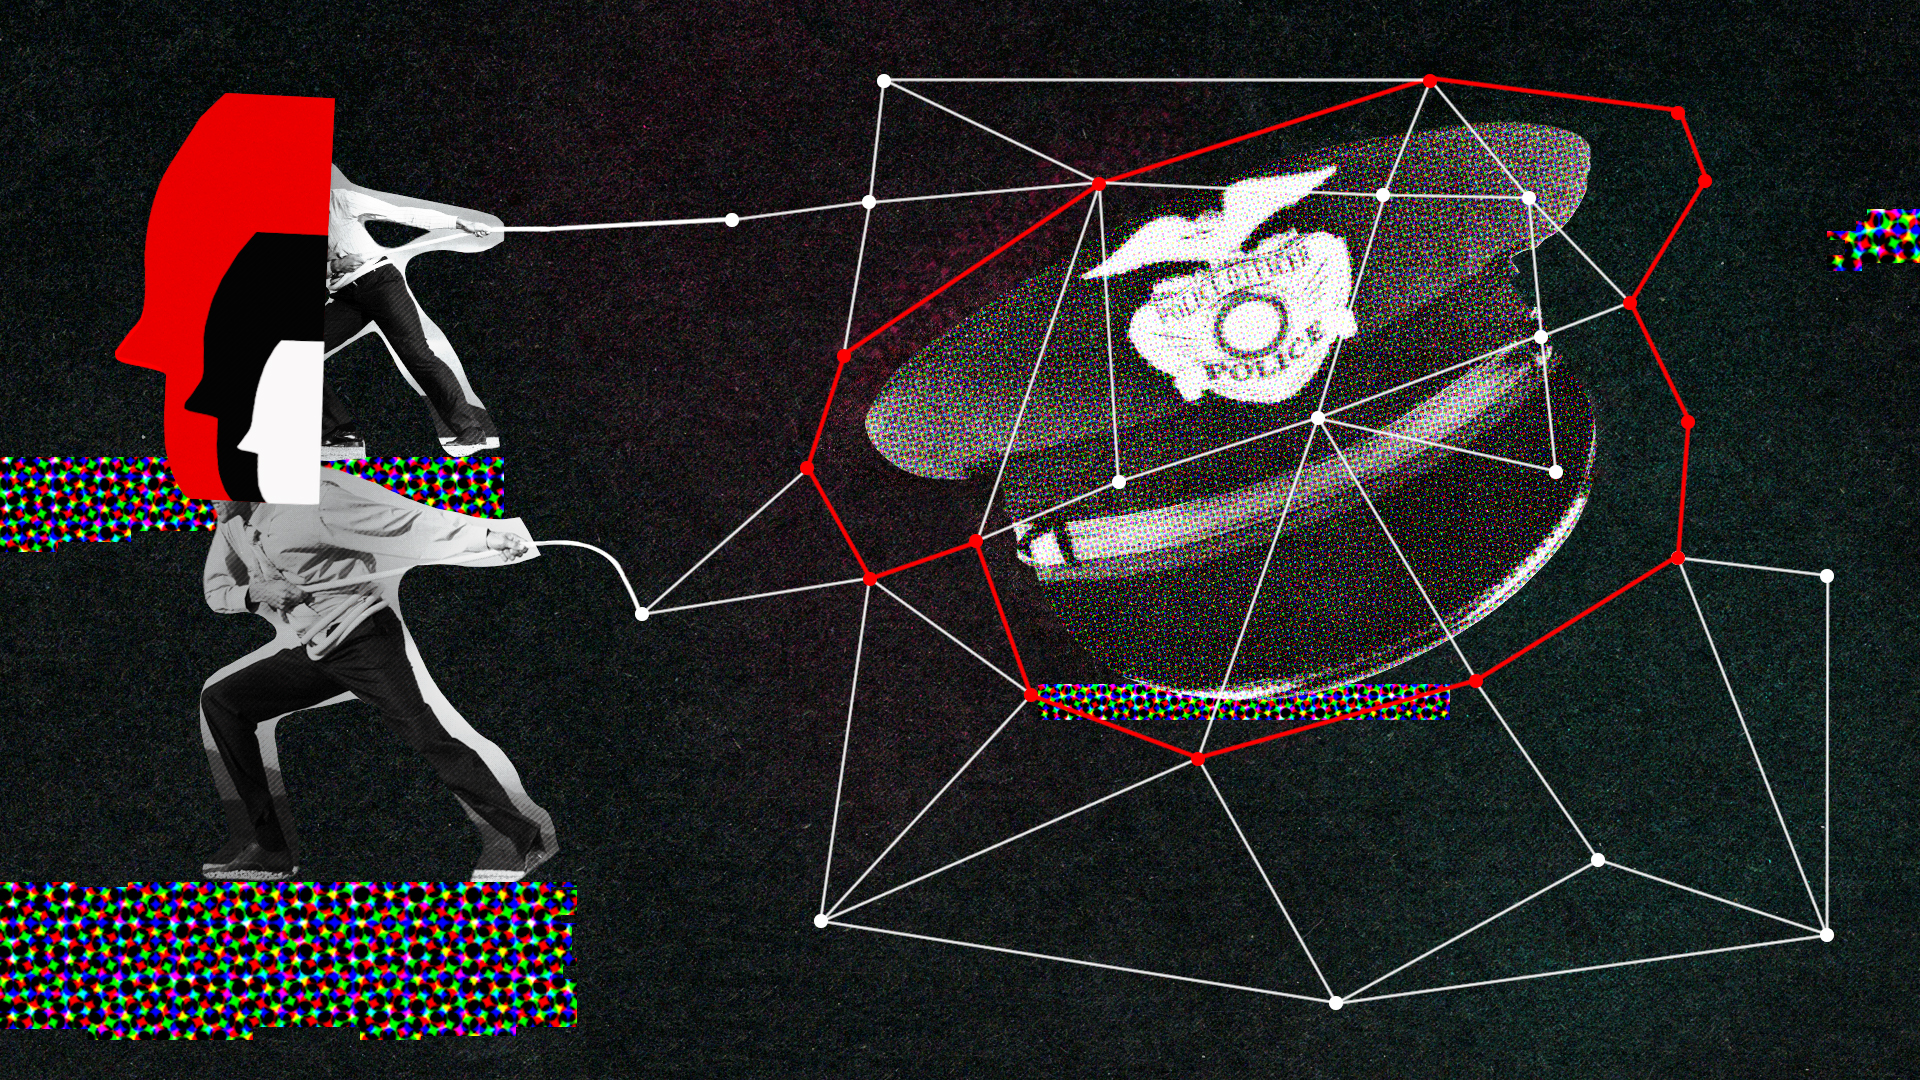 conceptual illustration showing a police hat with overlapped nueral network that's being dismantled.